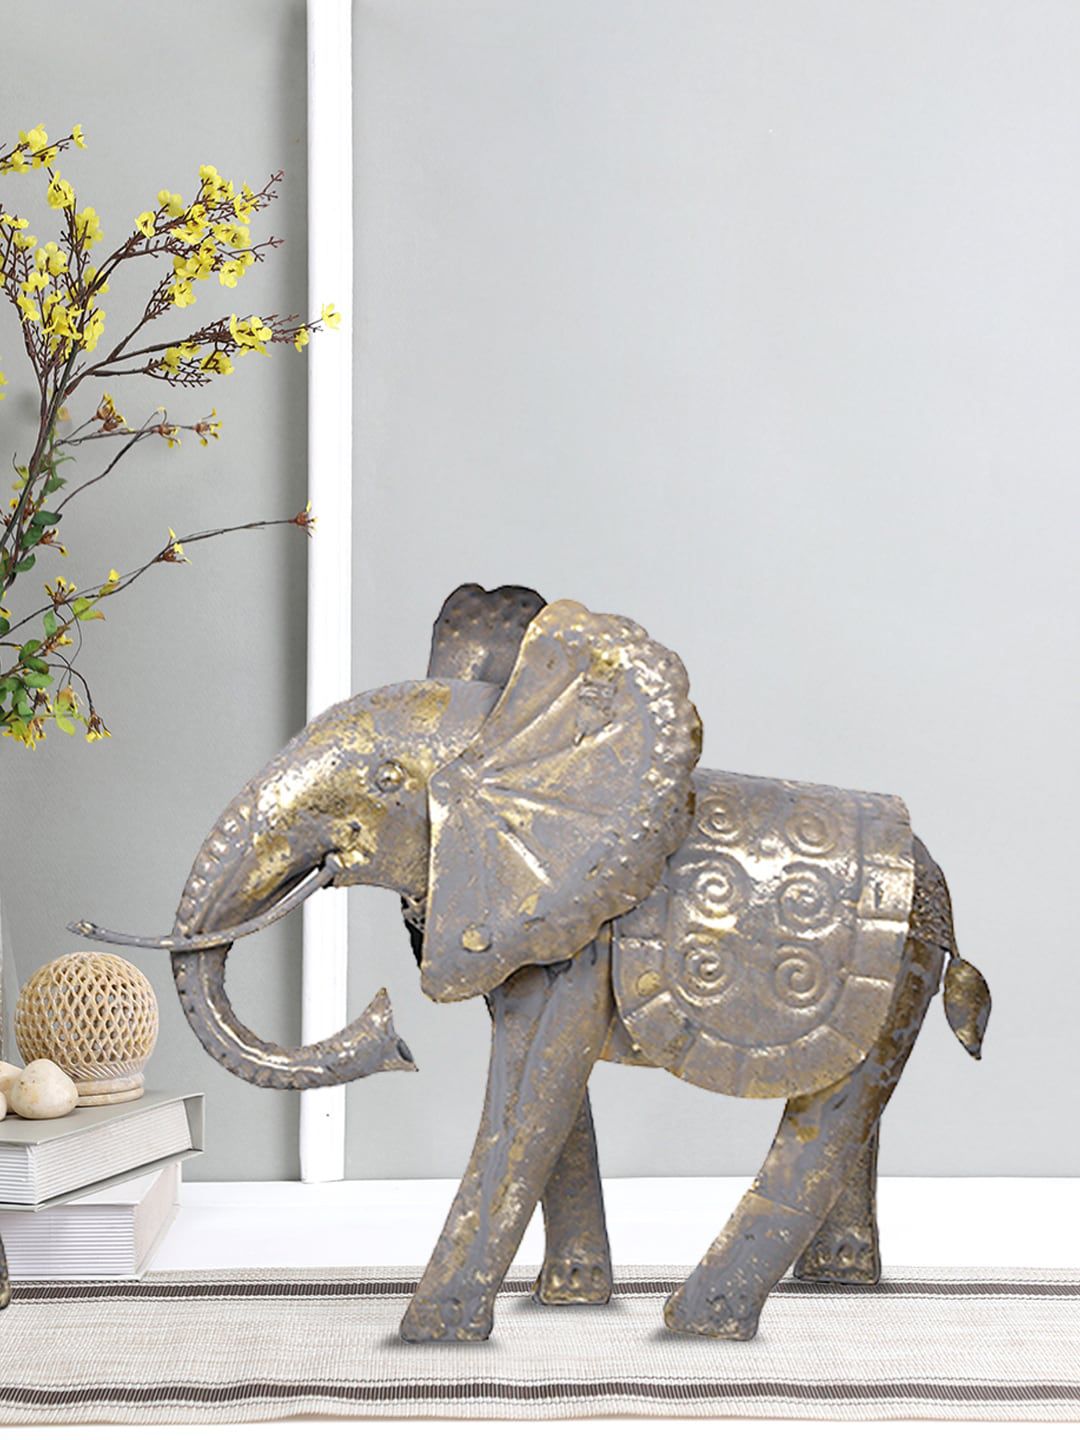 Aapno Rajasthan Gold Textured Elephant Table Decor Showpiece Price in India